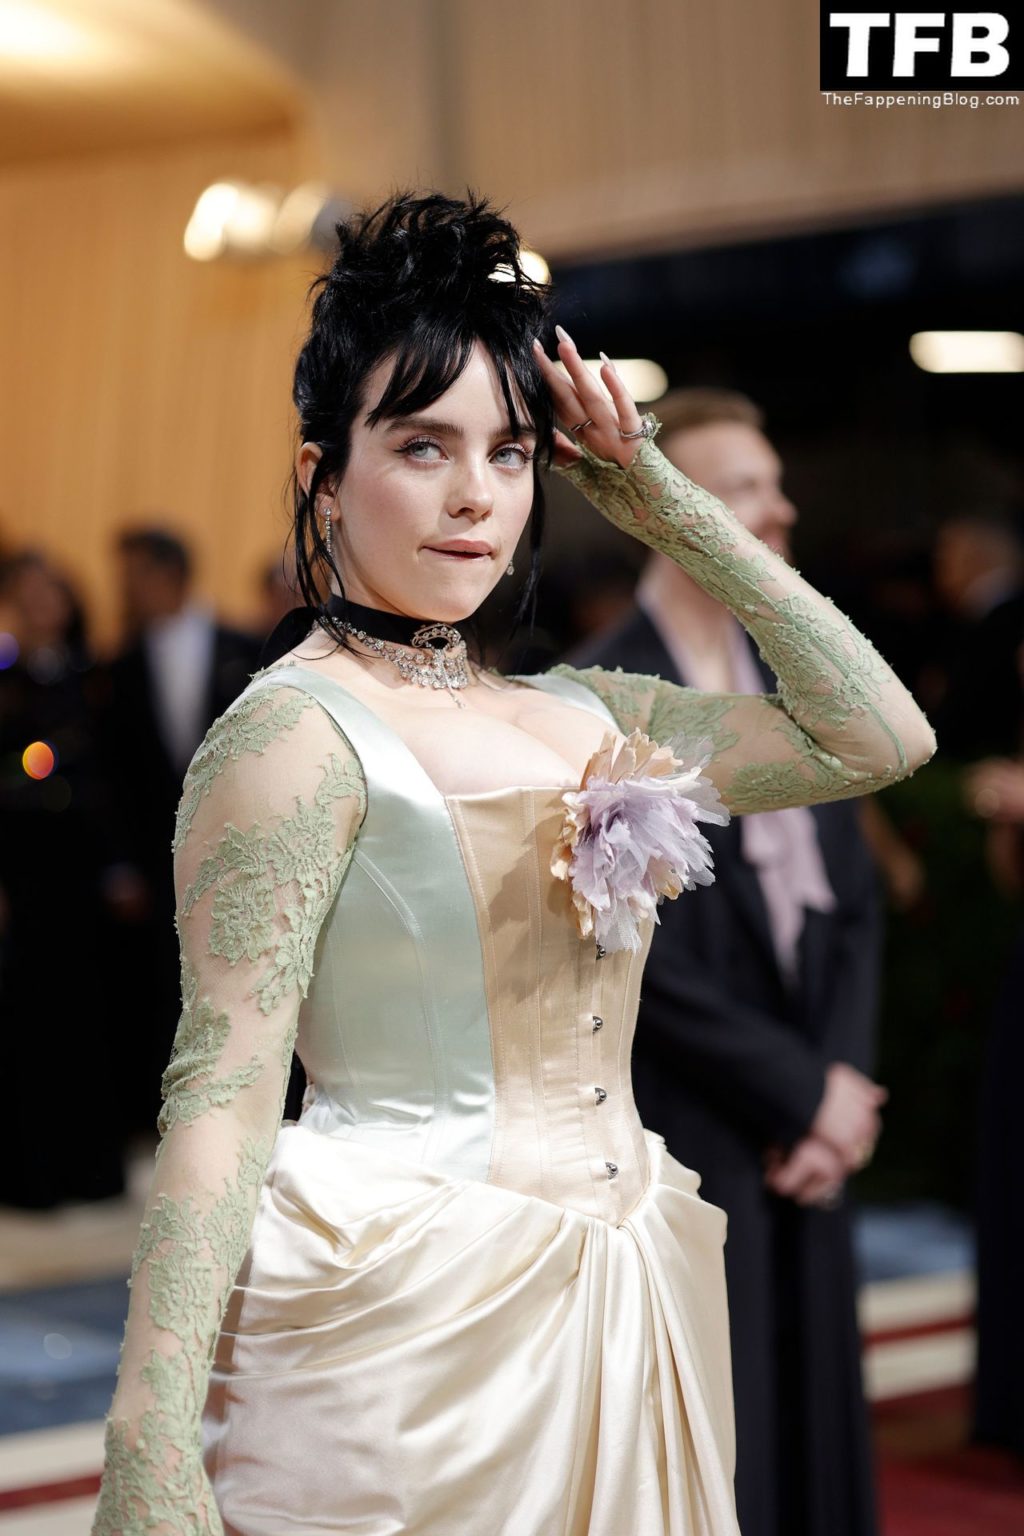 Billie Eilish Sexy The Fappening Blog 120 1024x1536 - Billie Eilish Showcases Nice Cleavage at The 2022 Met Gala in NYC (155 Photos)